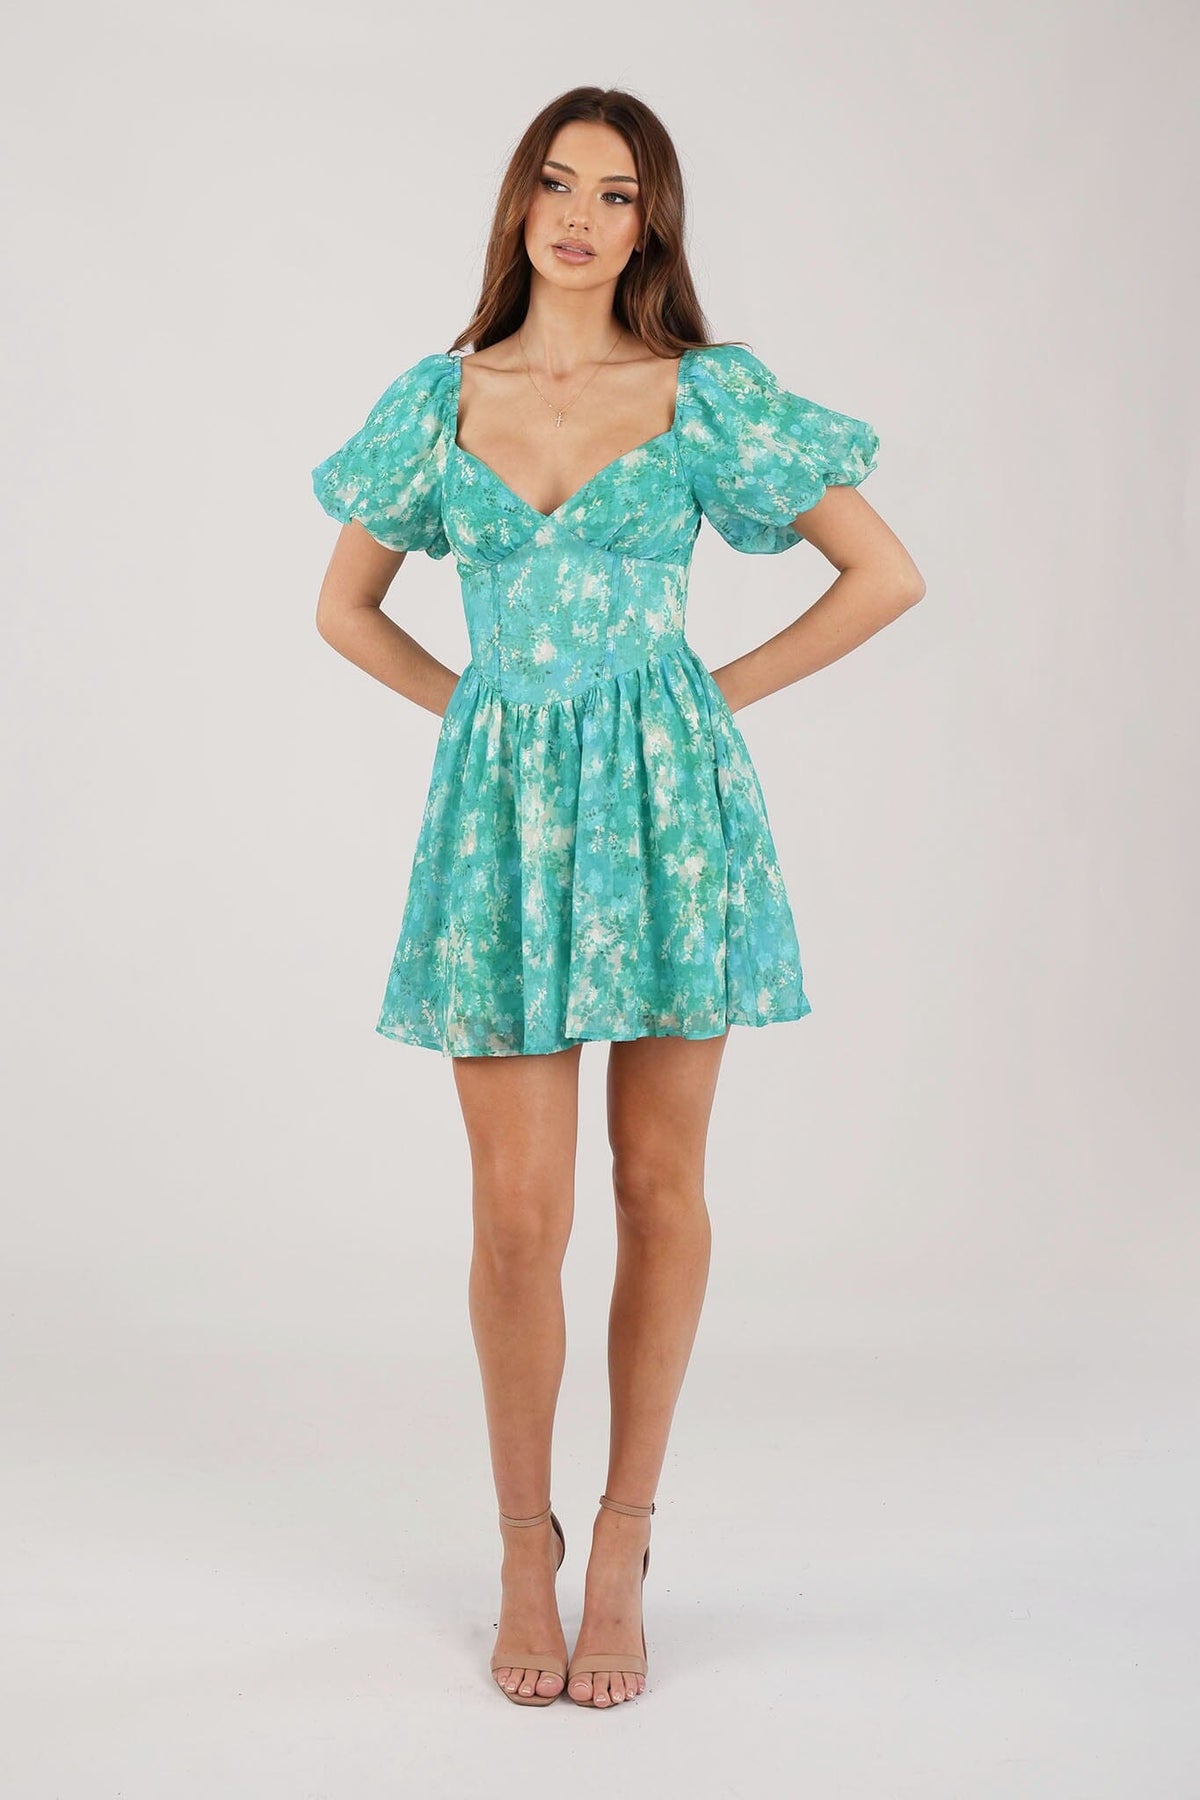 Green Floral Mini Dress with Sweetheart Neckline and Puff Sleeves worn on shoulder